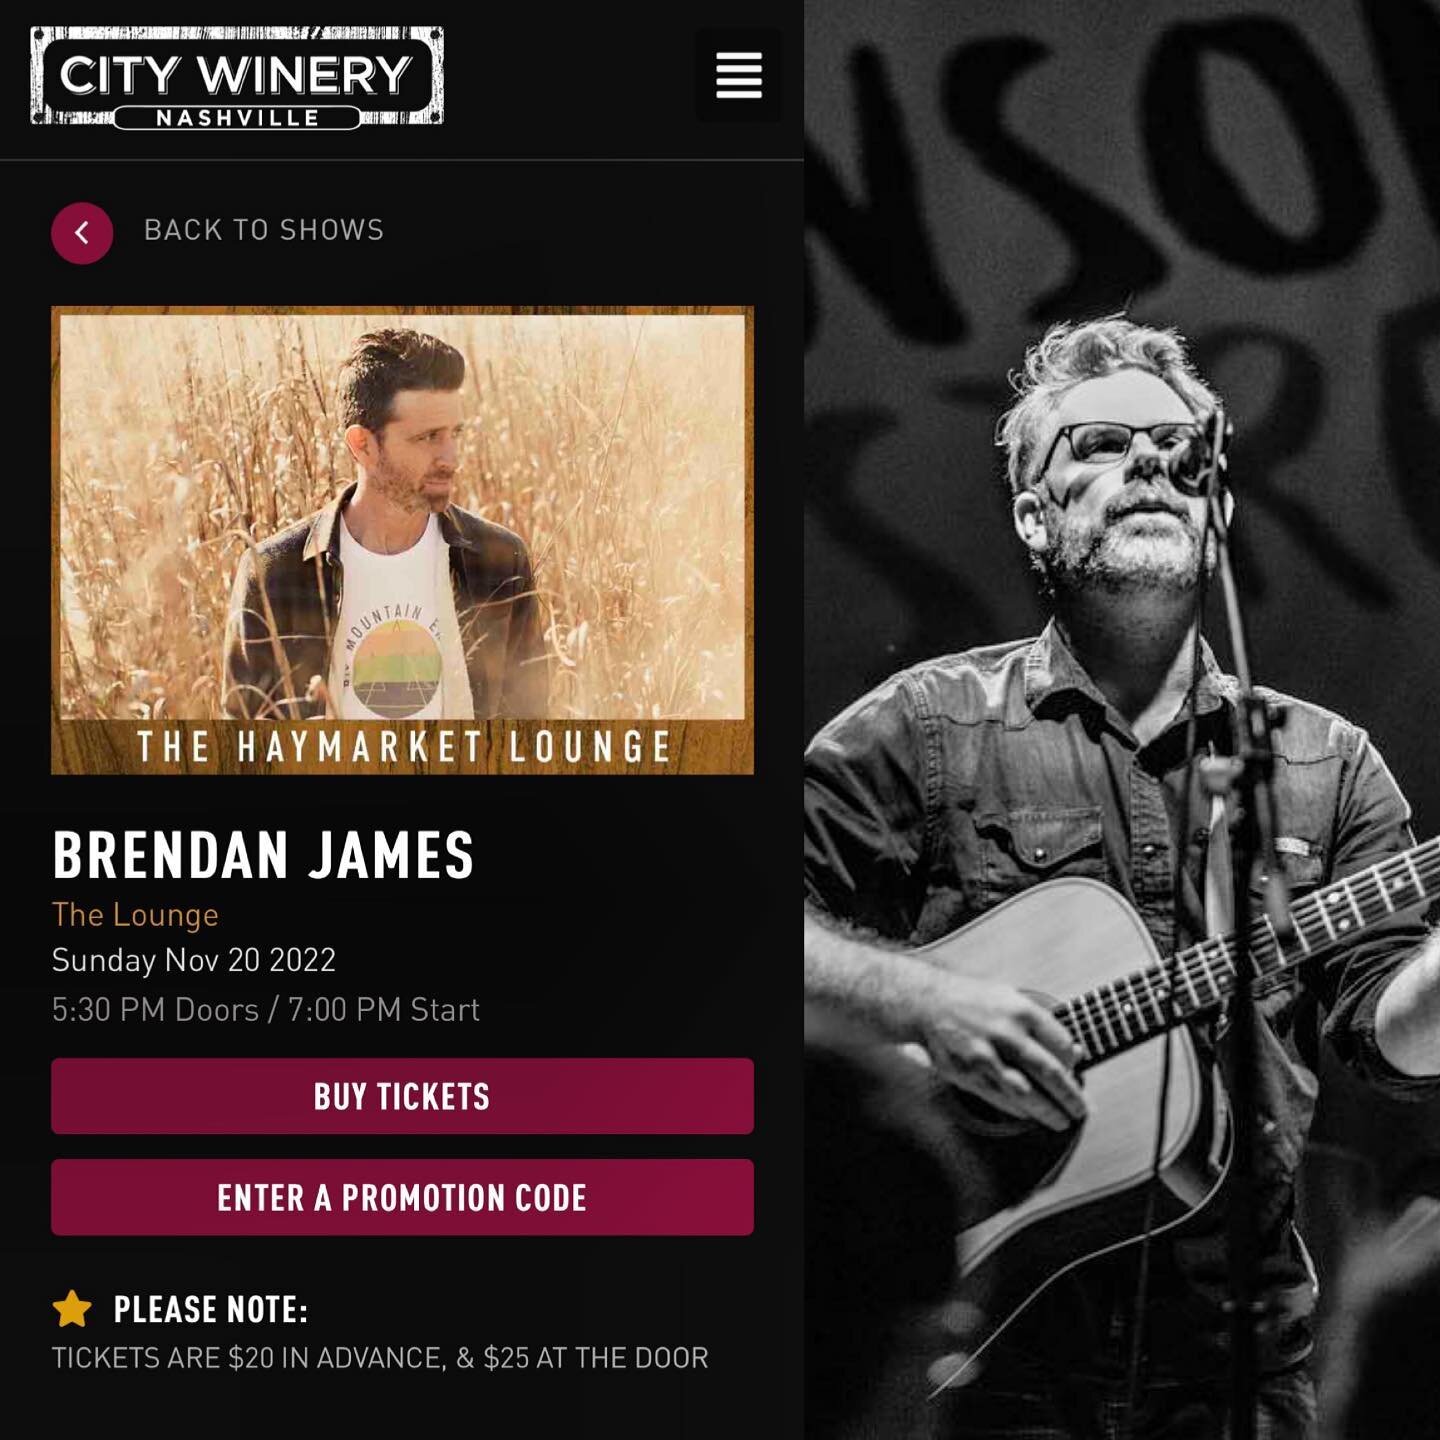 Sunday 11/20 Excited to be opening for @brendanjames_music 
@citywinerynsh @craigmeyersteakhouse Going go be a great show, share with friends! #singalong #nashville #singersongwriters #wine #tickets #drive #behappy @spotify @applemusic @bmi